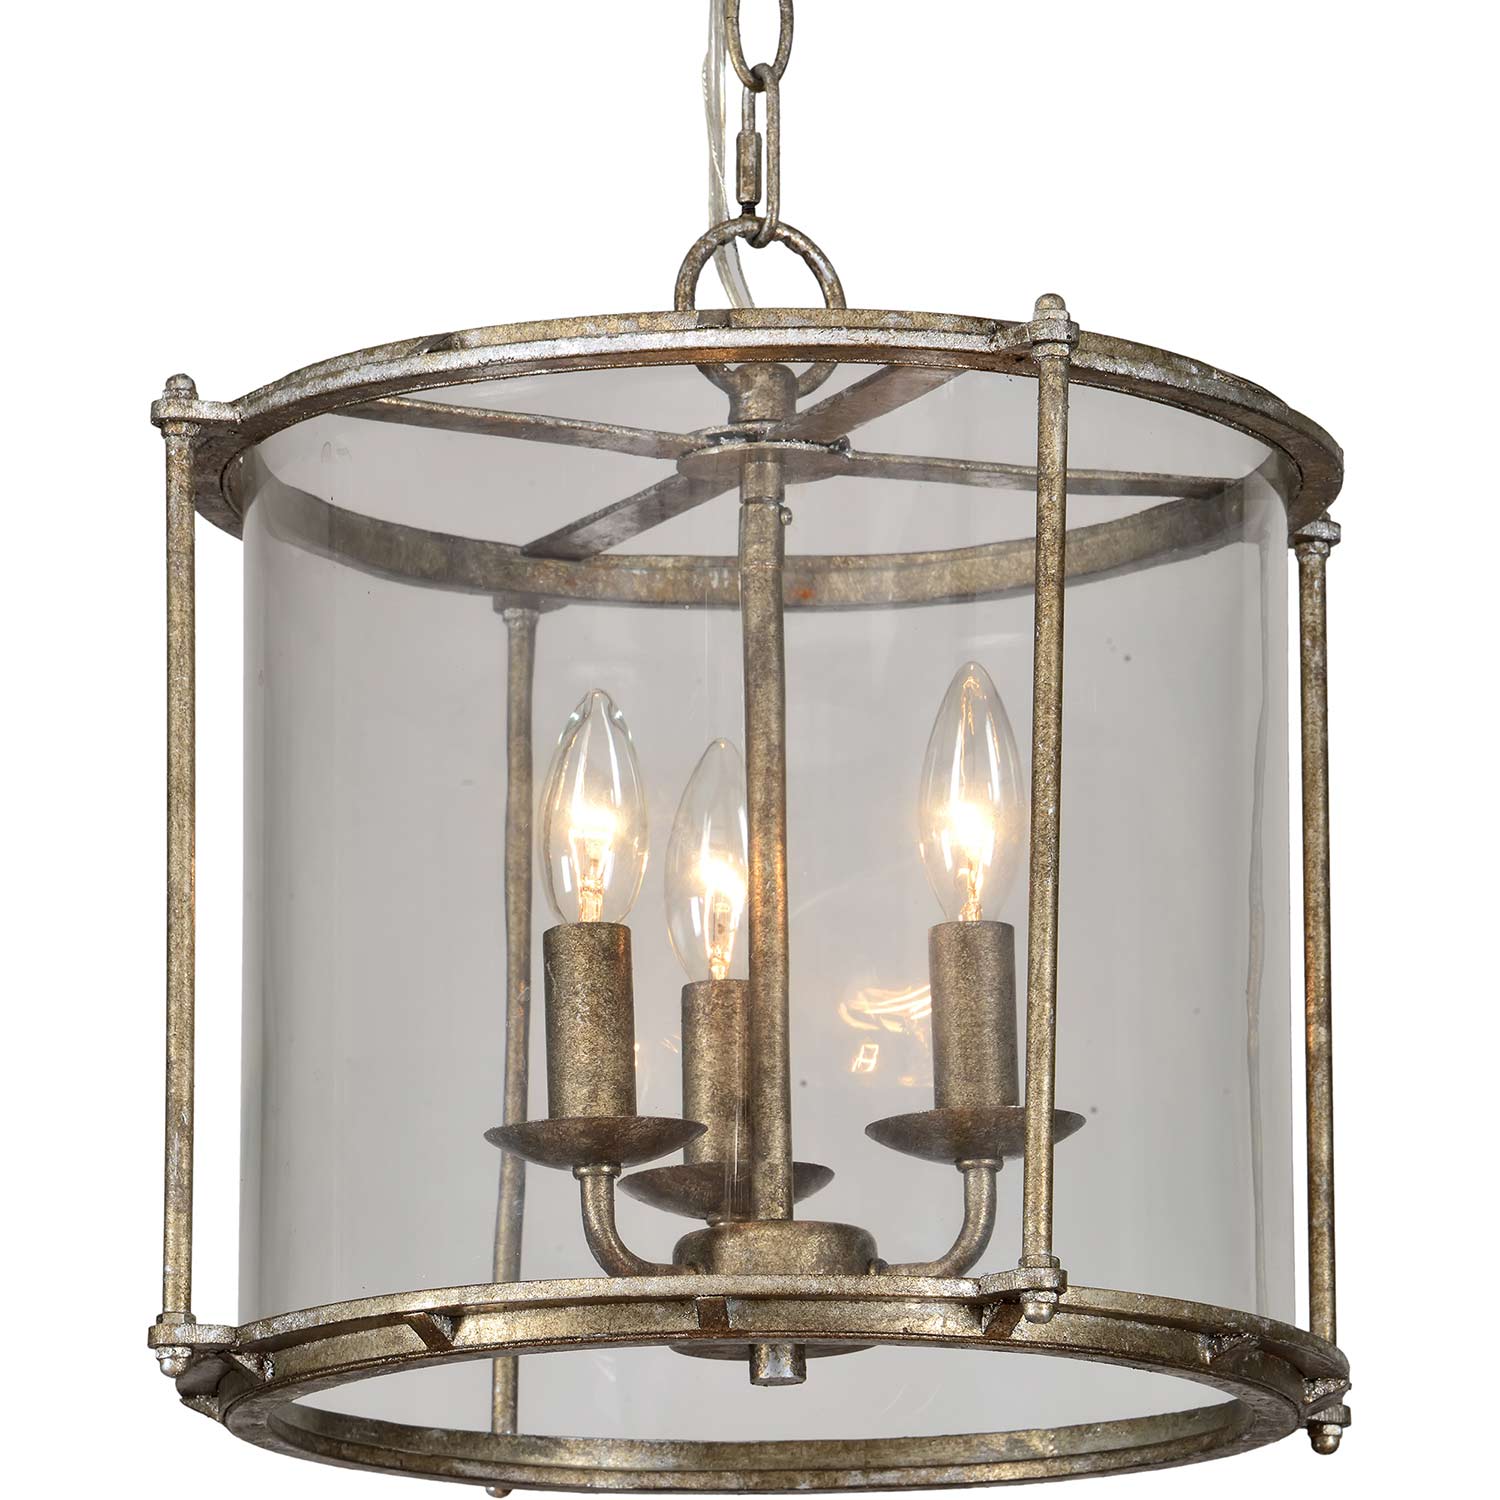 Ren-Wil Browning Ceiling Fixture - Rustic Silver/Clear